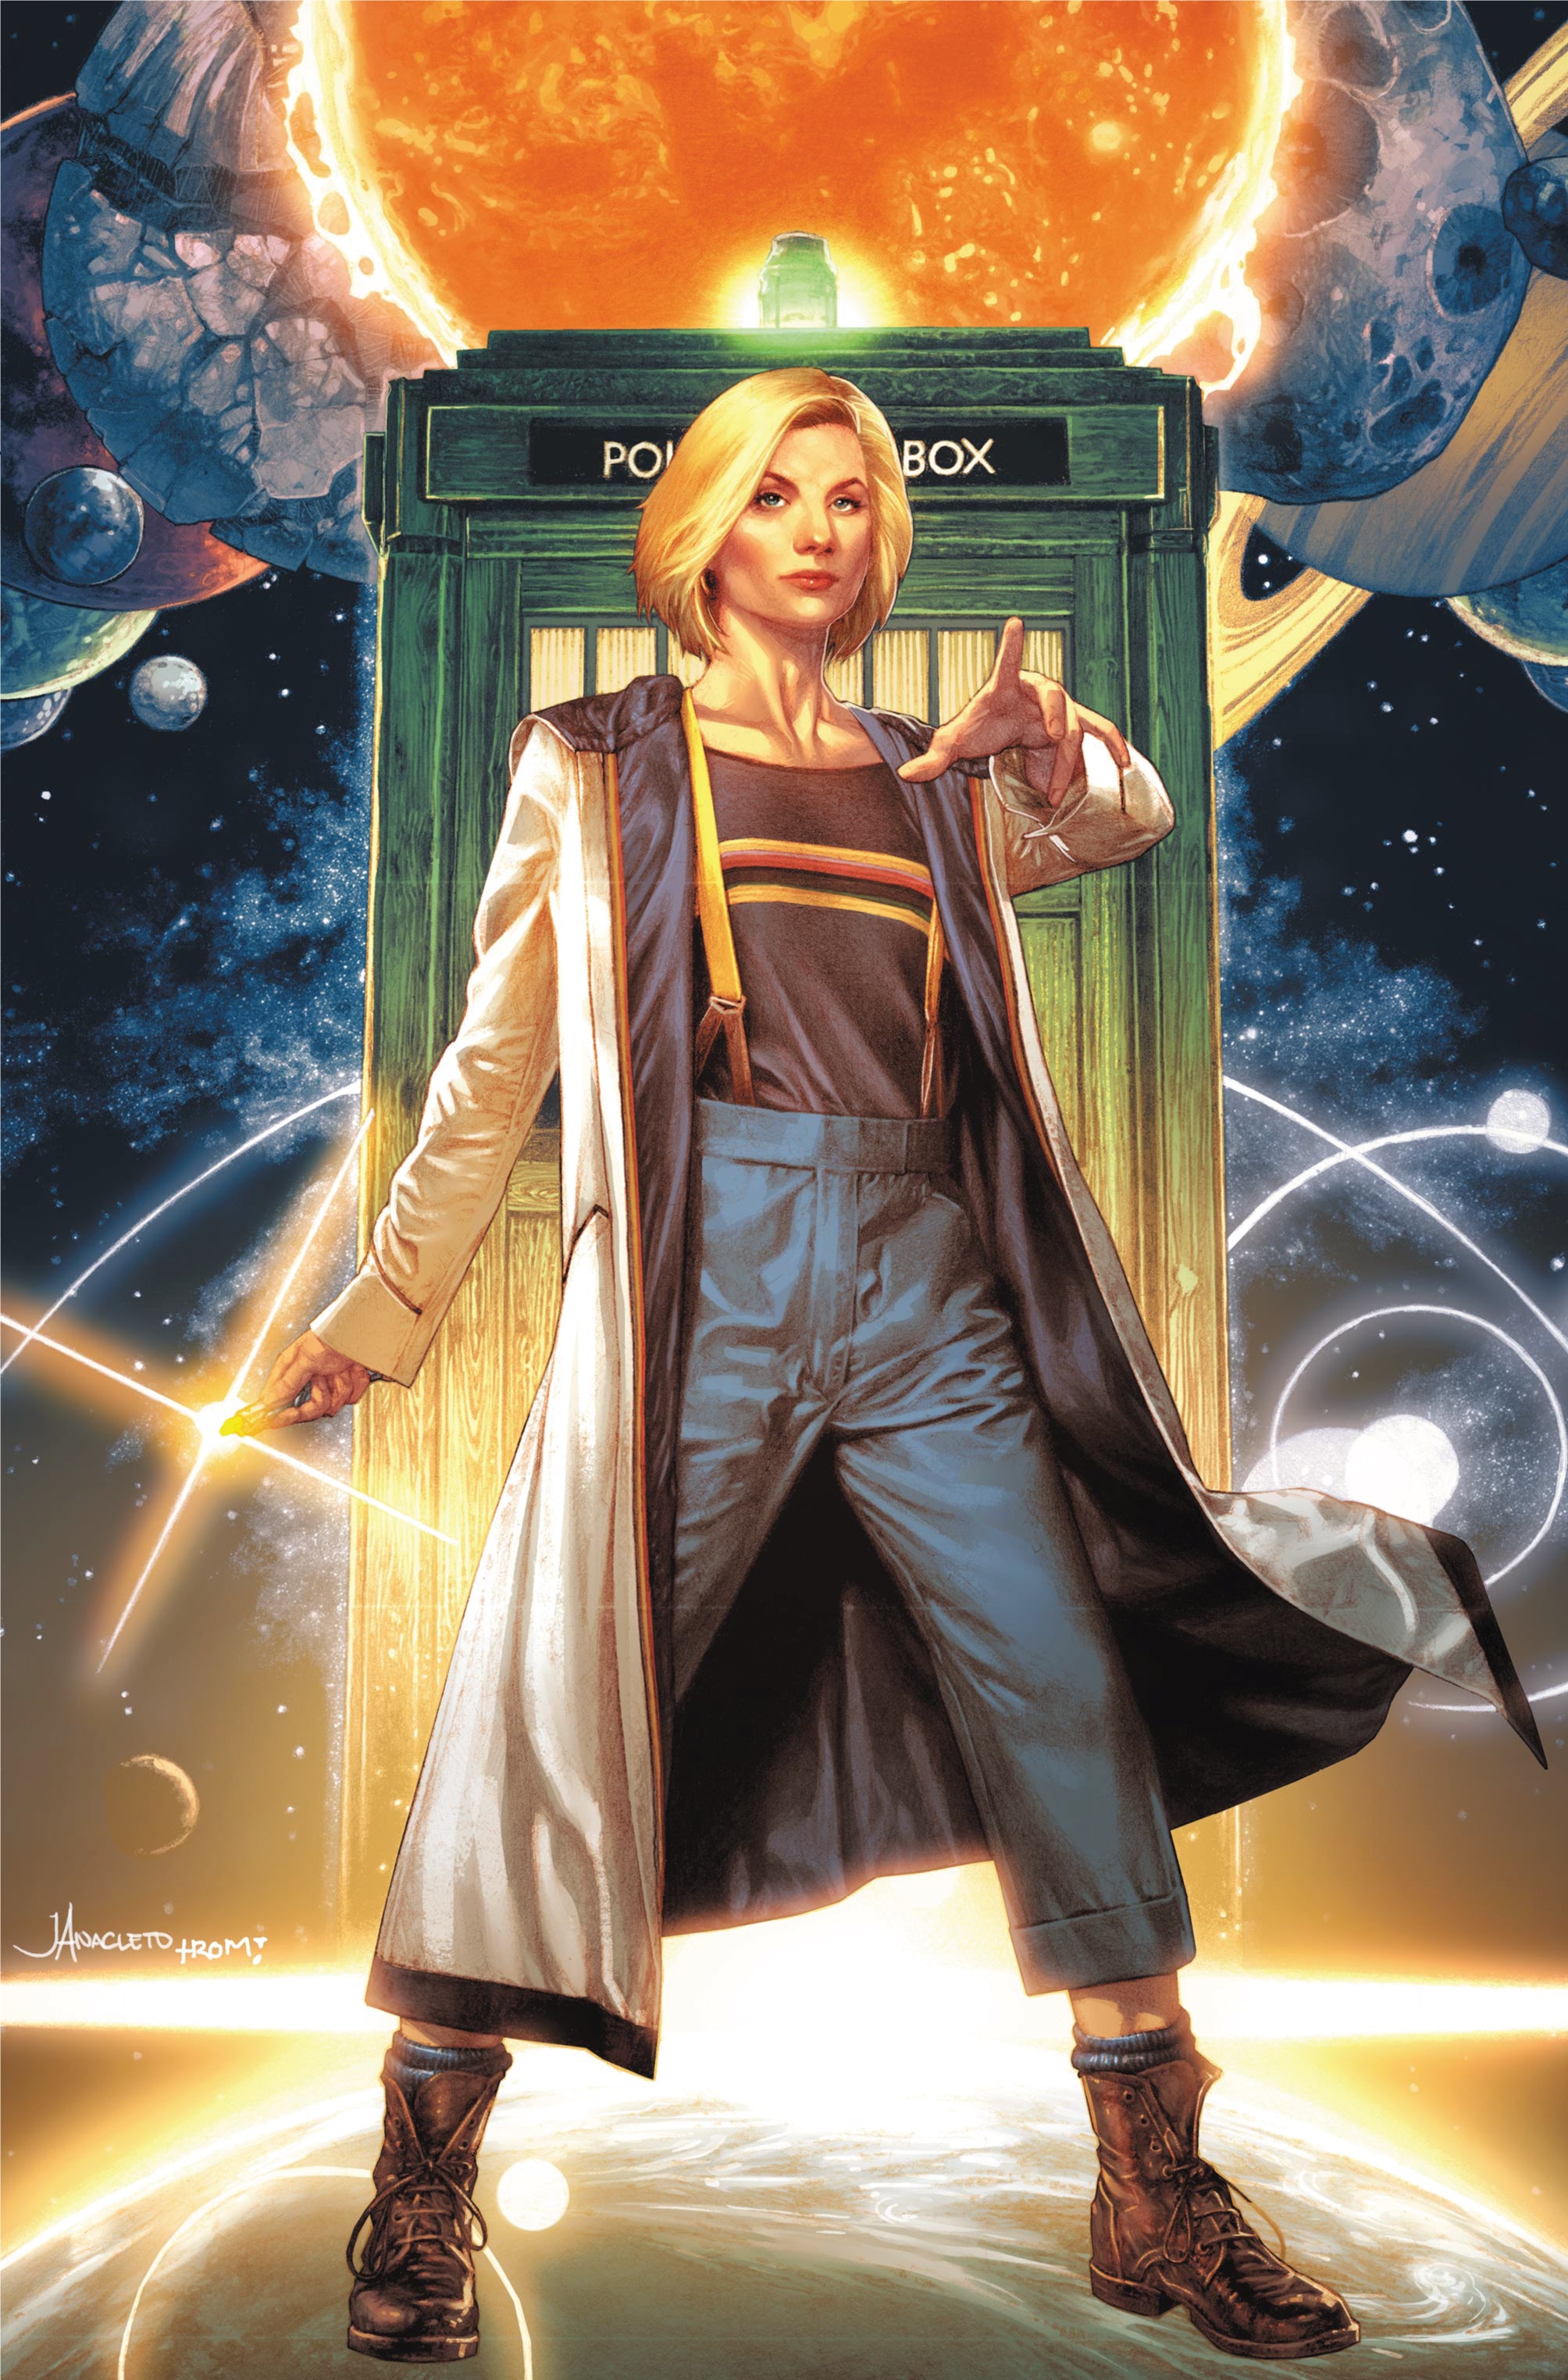 DOCTOR WHO 13TH #1 UNKNOWN COMIC BOOKS ANACLETO EXCLUSIVE VAR VIRGIN 11/7/2018